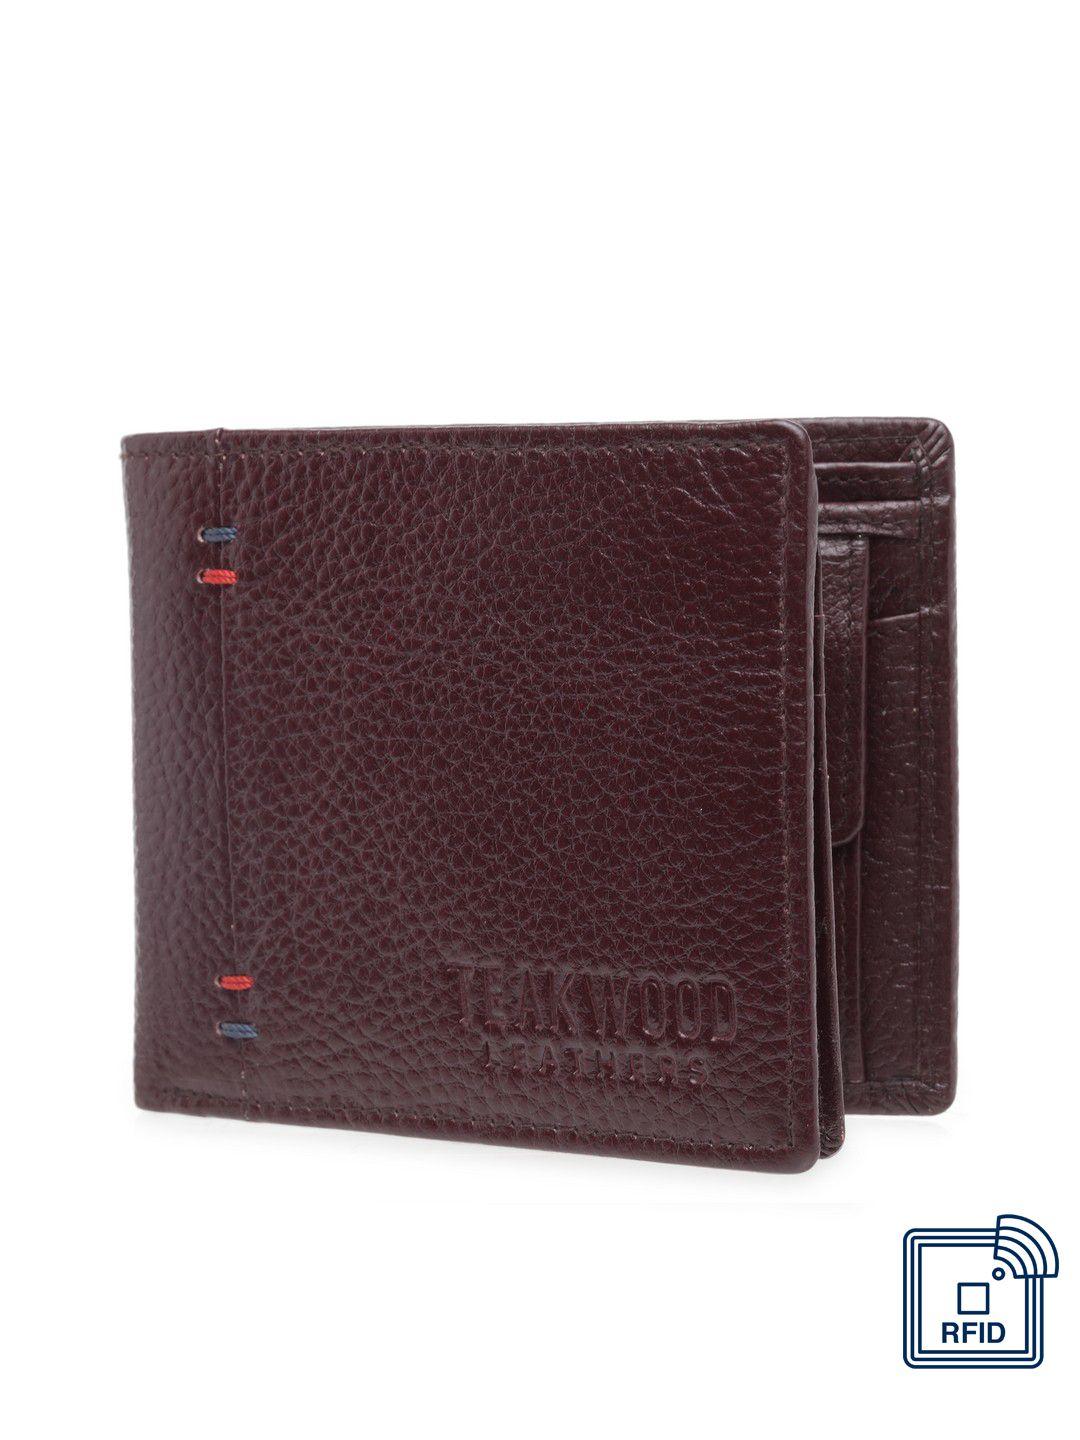 teakwood leathers men brown textured two fold leather wallet